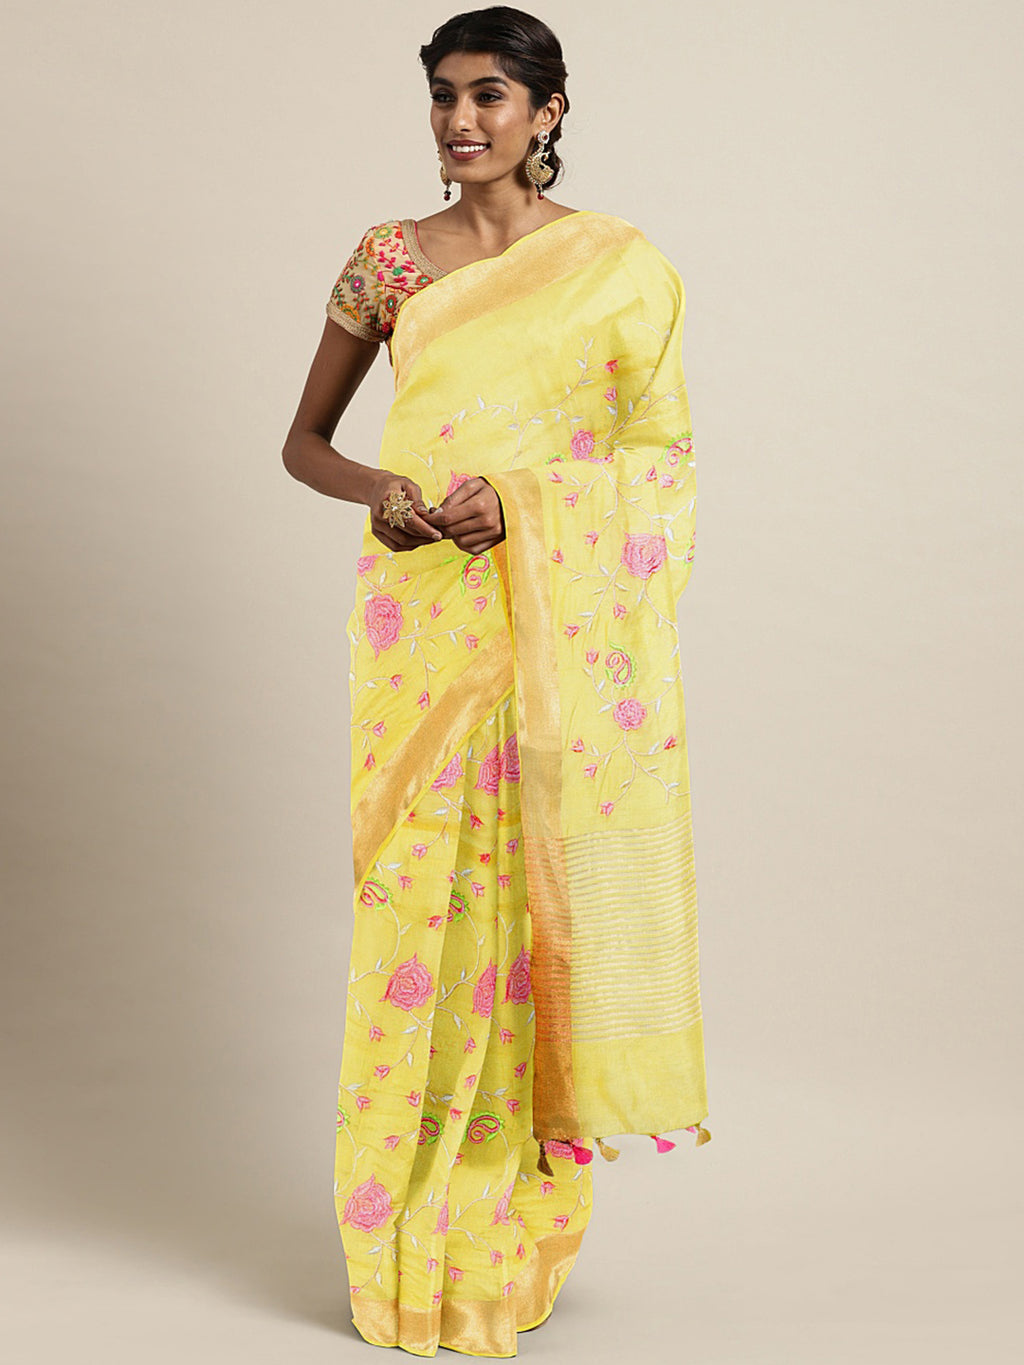 Kalakari India Kota Silk Embroidered Saree With Blouse ALBGSA0169-Saree-Kalakari India-ALBGSA0169-Geographical Indication, Hand Crafted, Heritage Prints, Linen, Natural Dyes, Pure Cotton, Sarees, Sustainable Fabrics, Woven-[Linen,Ethnic,wear,Fashionista,Handloom,Handicraft,Indigo,blockprint,block,print,Cotton,Chanderi,Blue, latest,classy,party,bollywood,trendy,summer,style,traditional,formal,elegant,unique,style,hand,block,print, dabu,booti,gift,present,glamorous,affordable,collectible,Sari,Sare